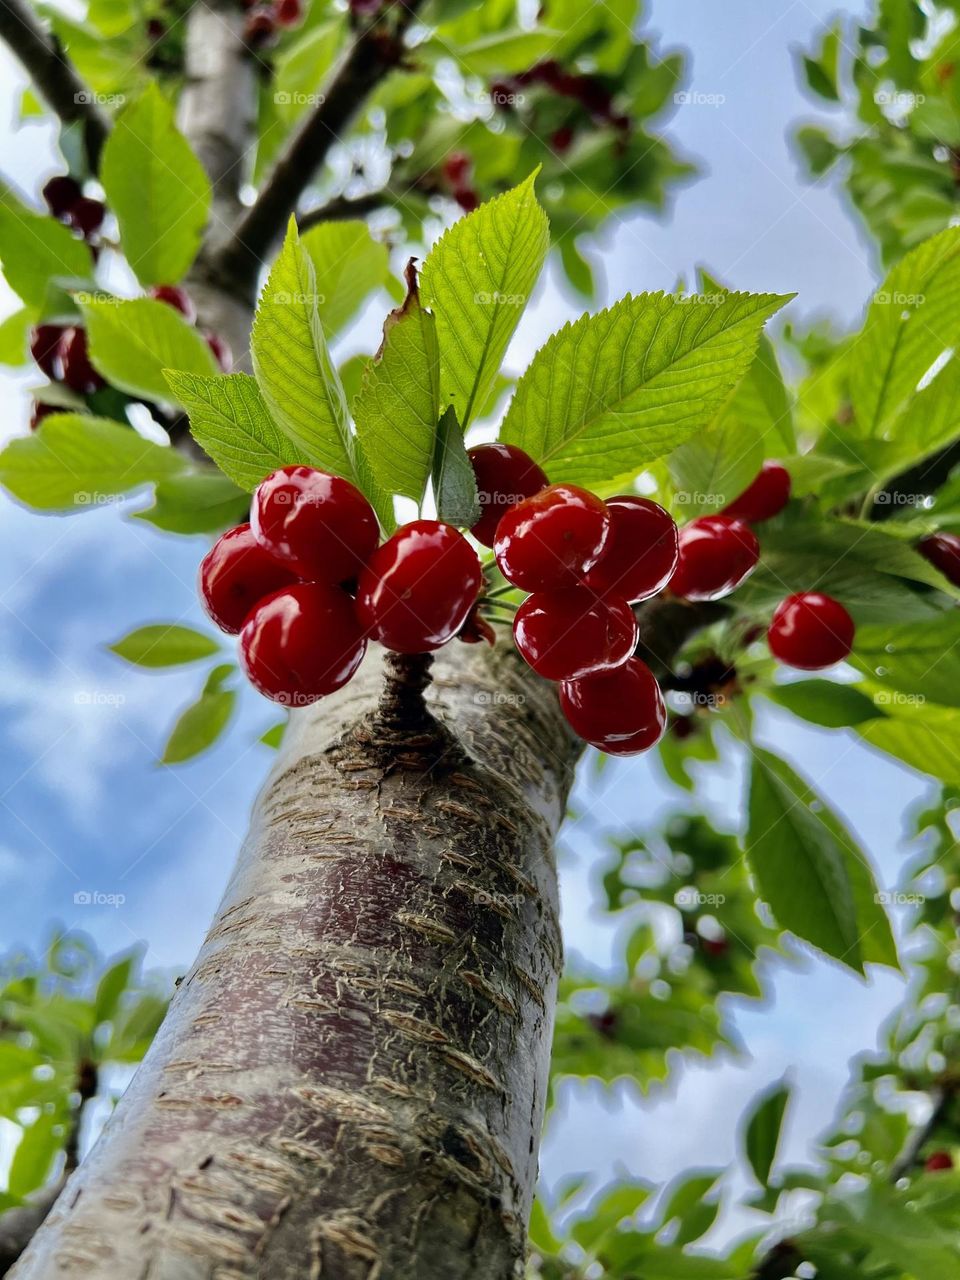 cherries seen from the ground up